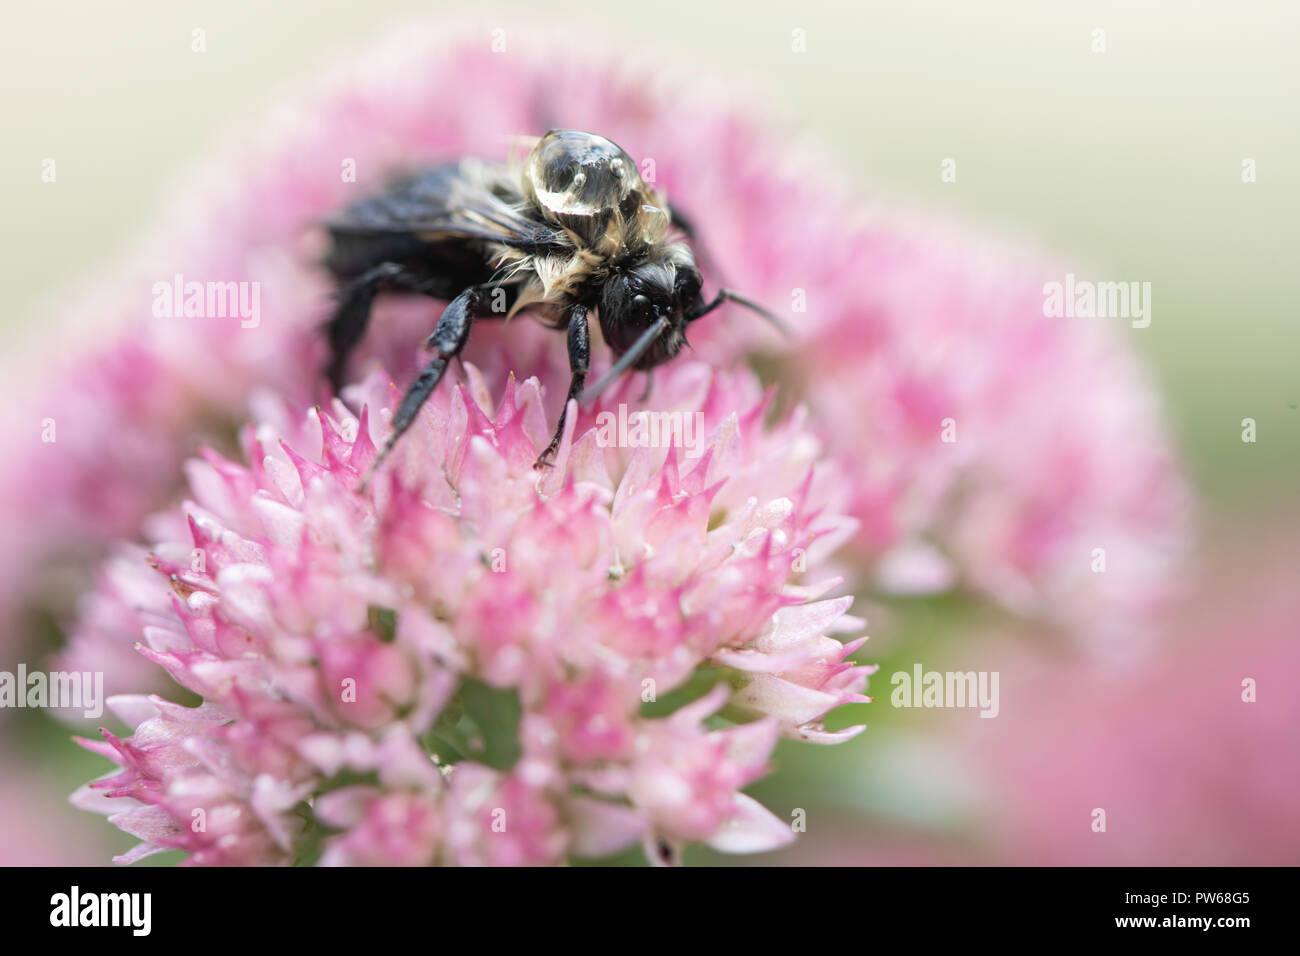 A cold wet bumble bee moves slowly with a rain drop on its back. Stock Photo